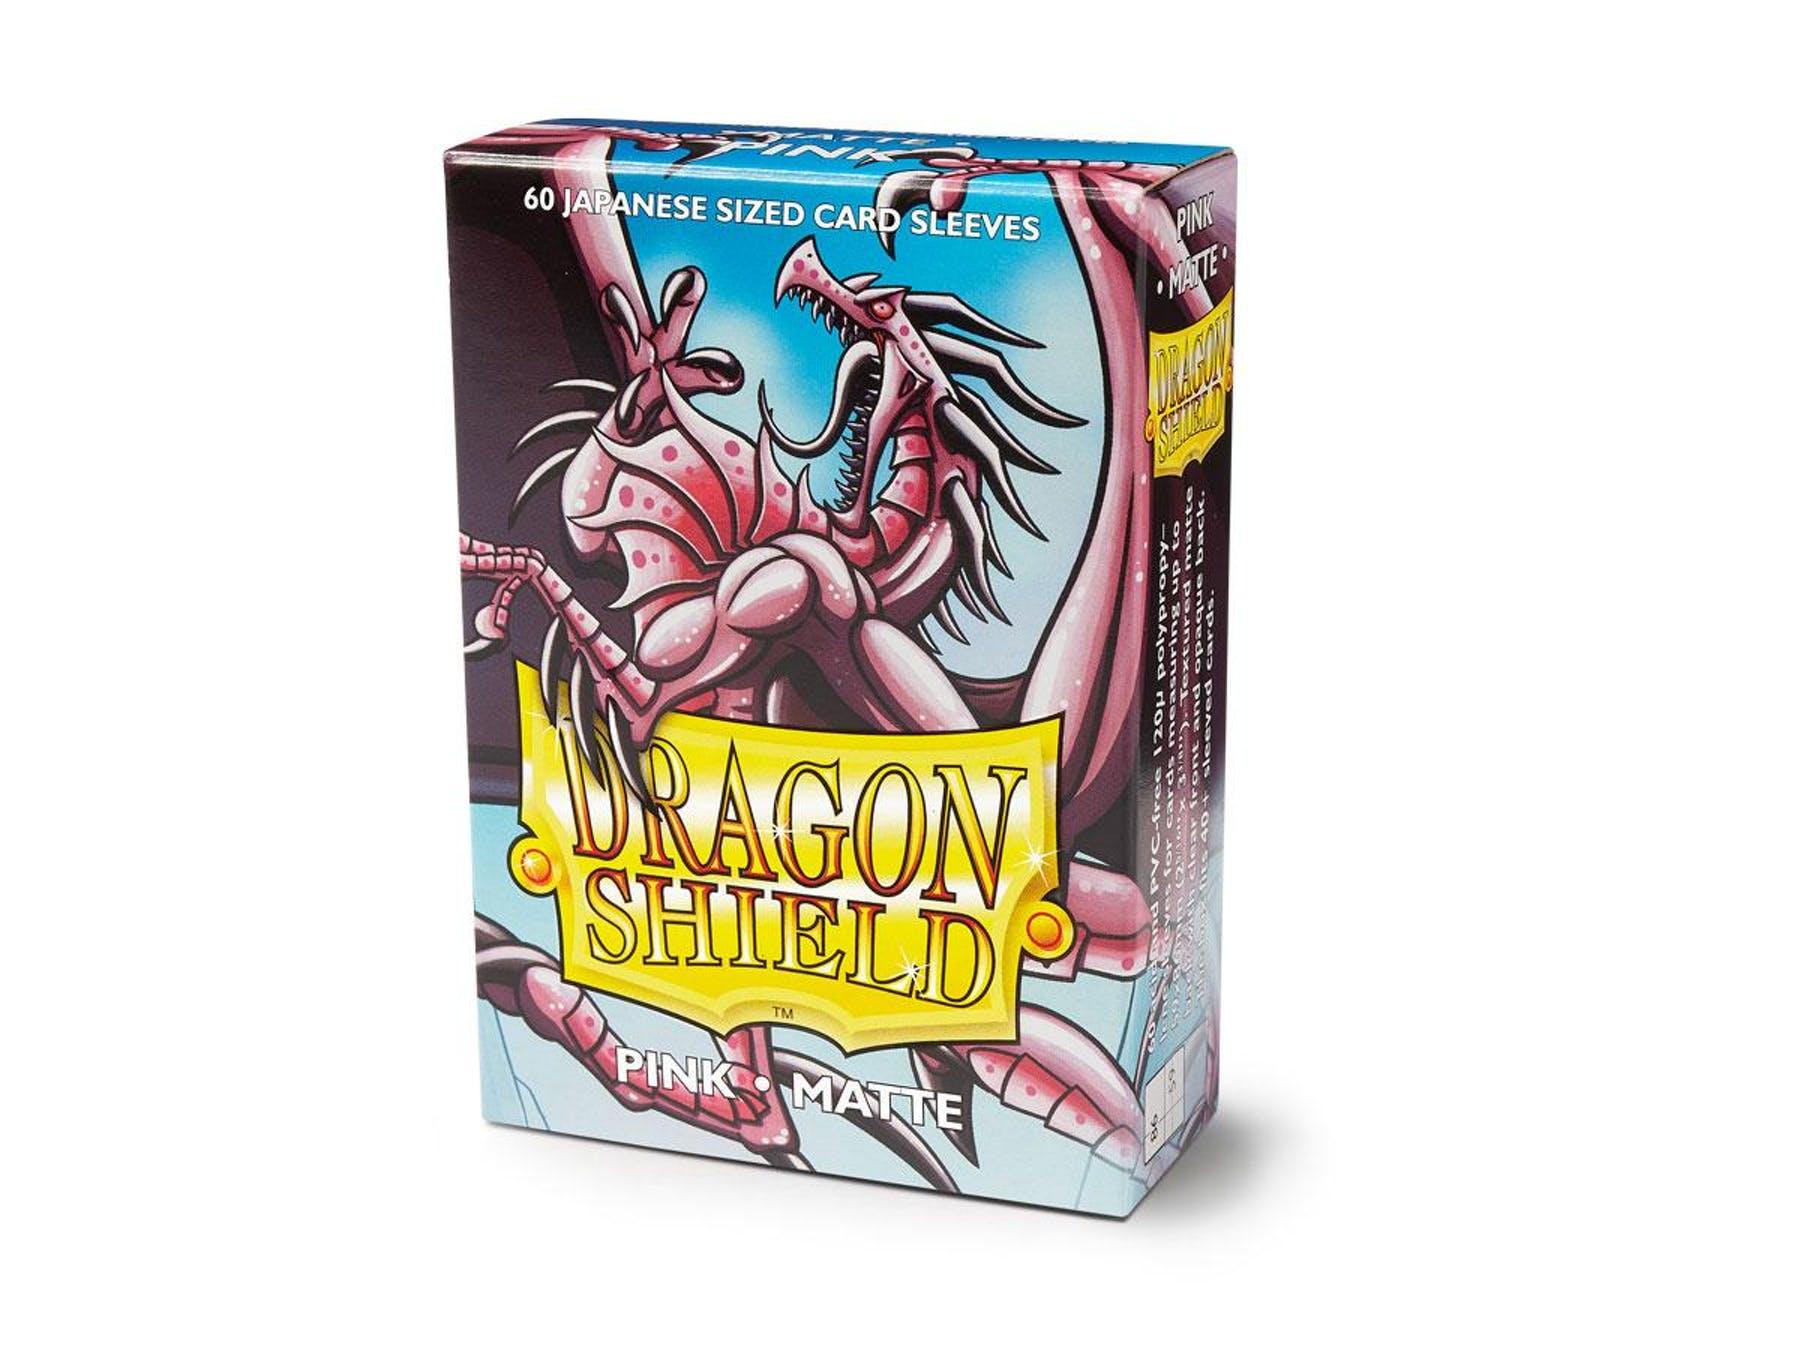 Dragon Shield - Card Sleeves: Pink Matte, japanese Size (60 Sleeves)